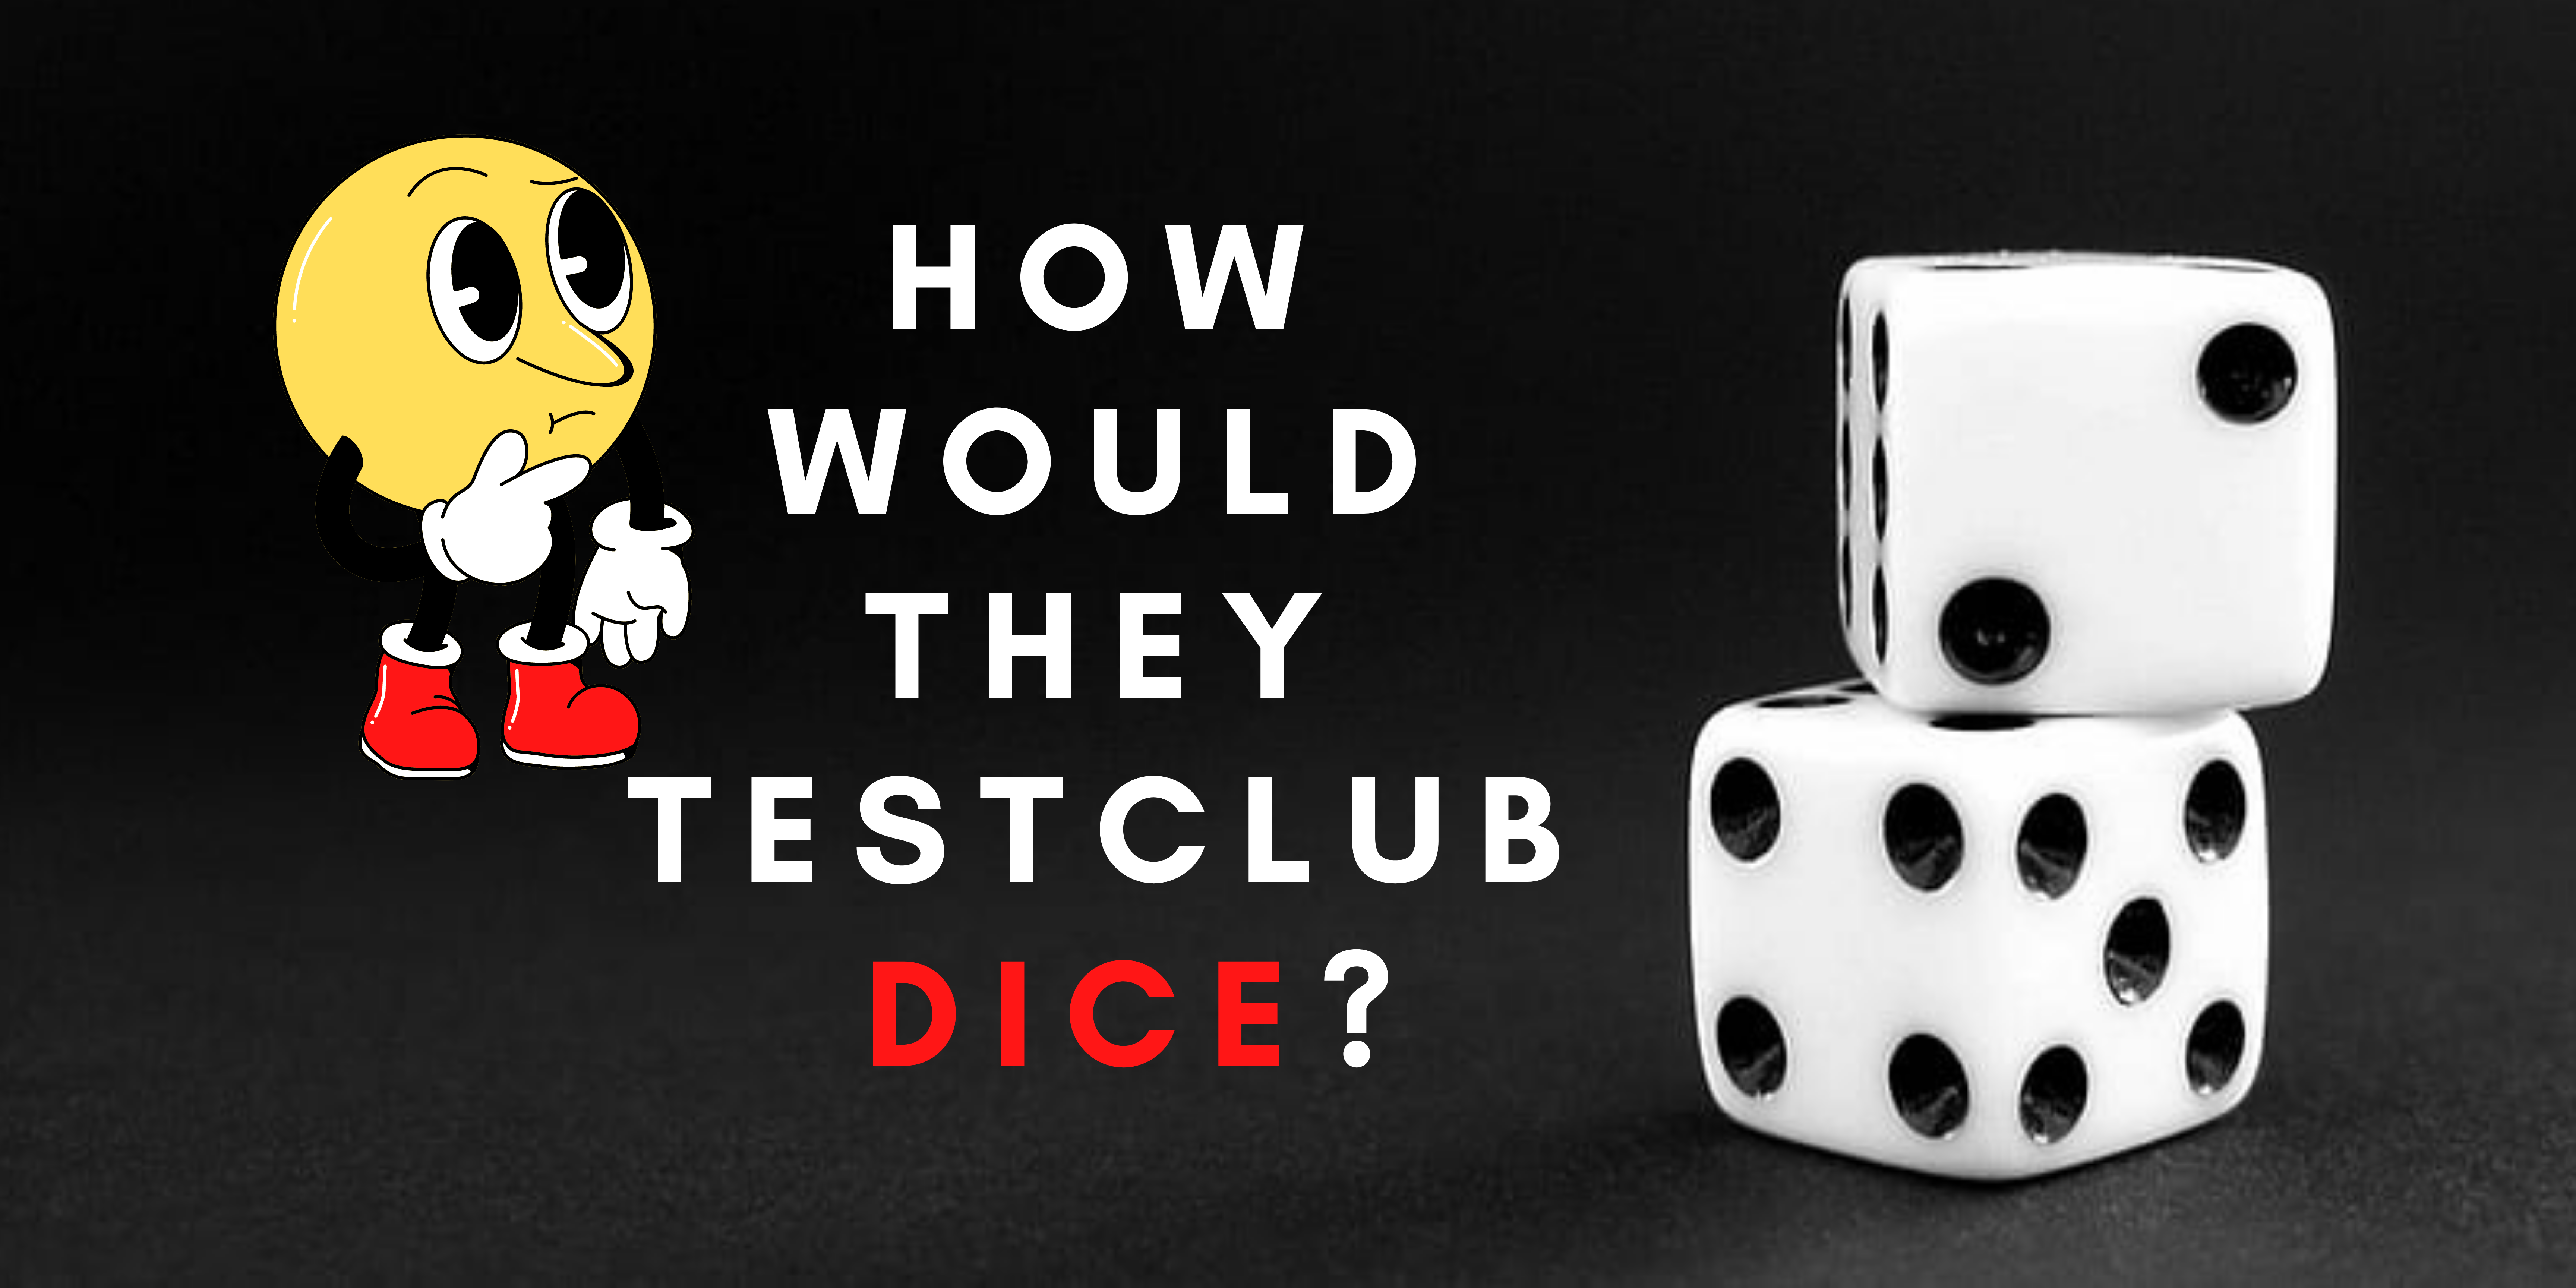 How Would They Test Club Dice?